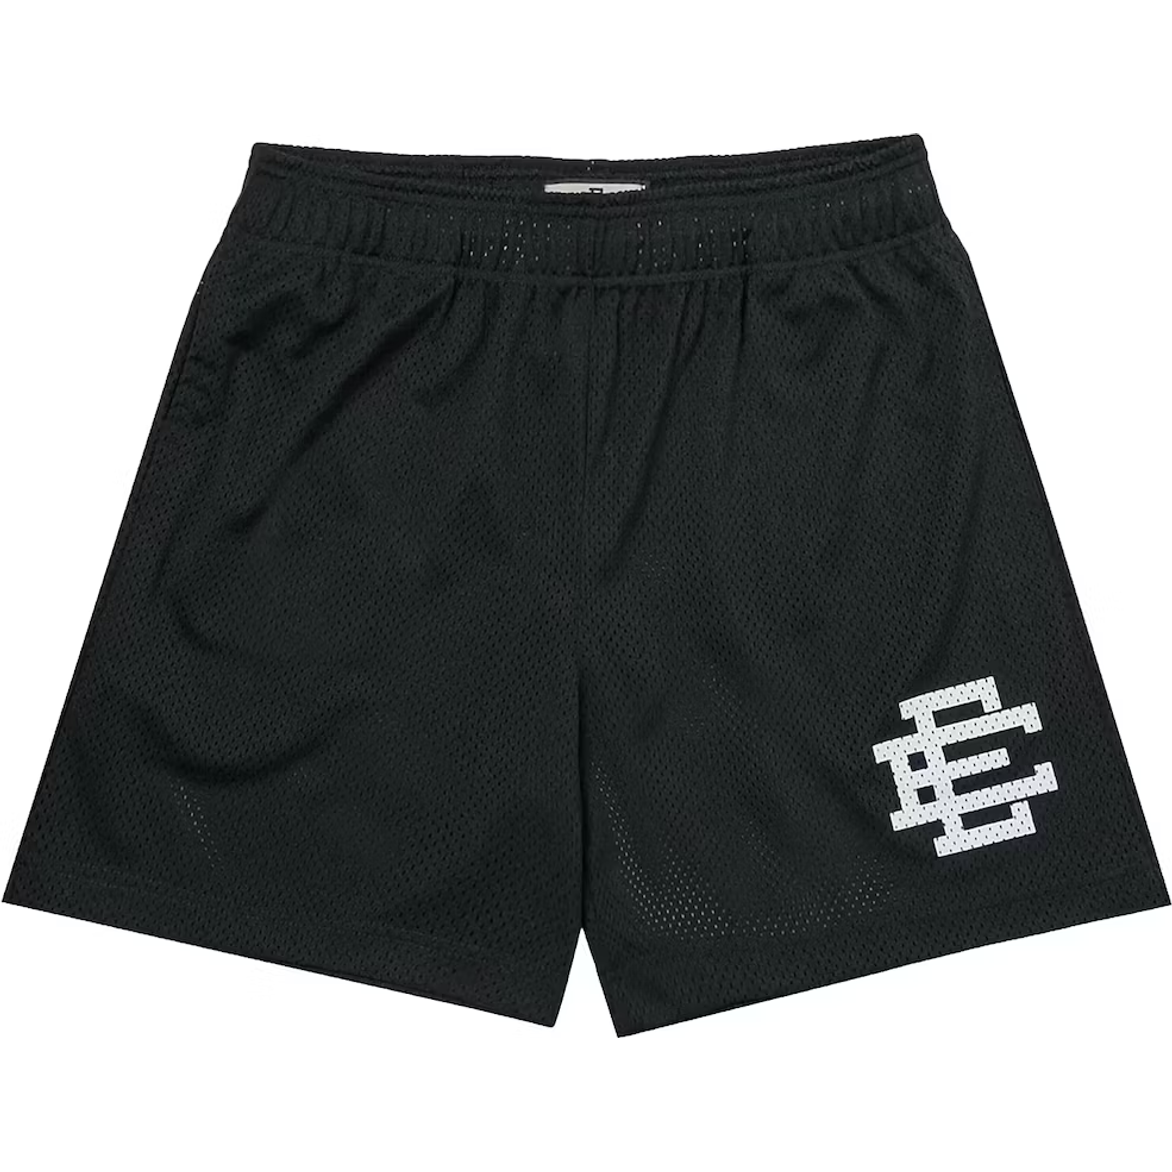 Eric Emanuel EE Basic Short (SS22) Black/White by Eric Emanuel from £150.00